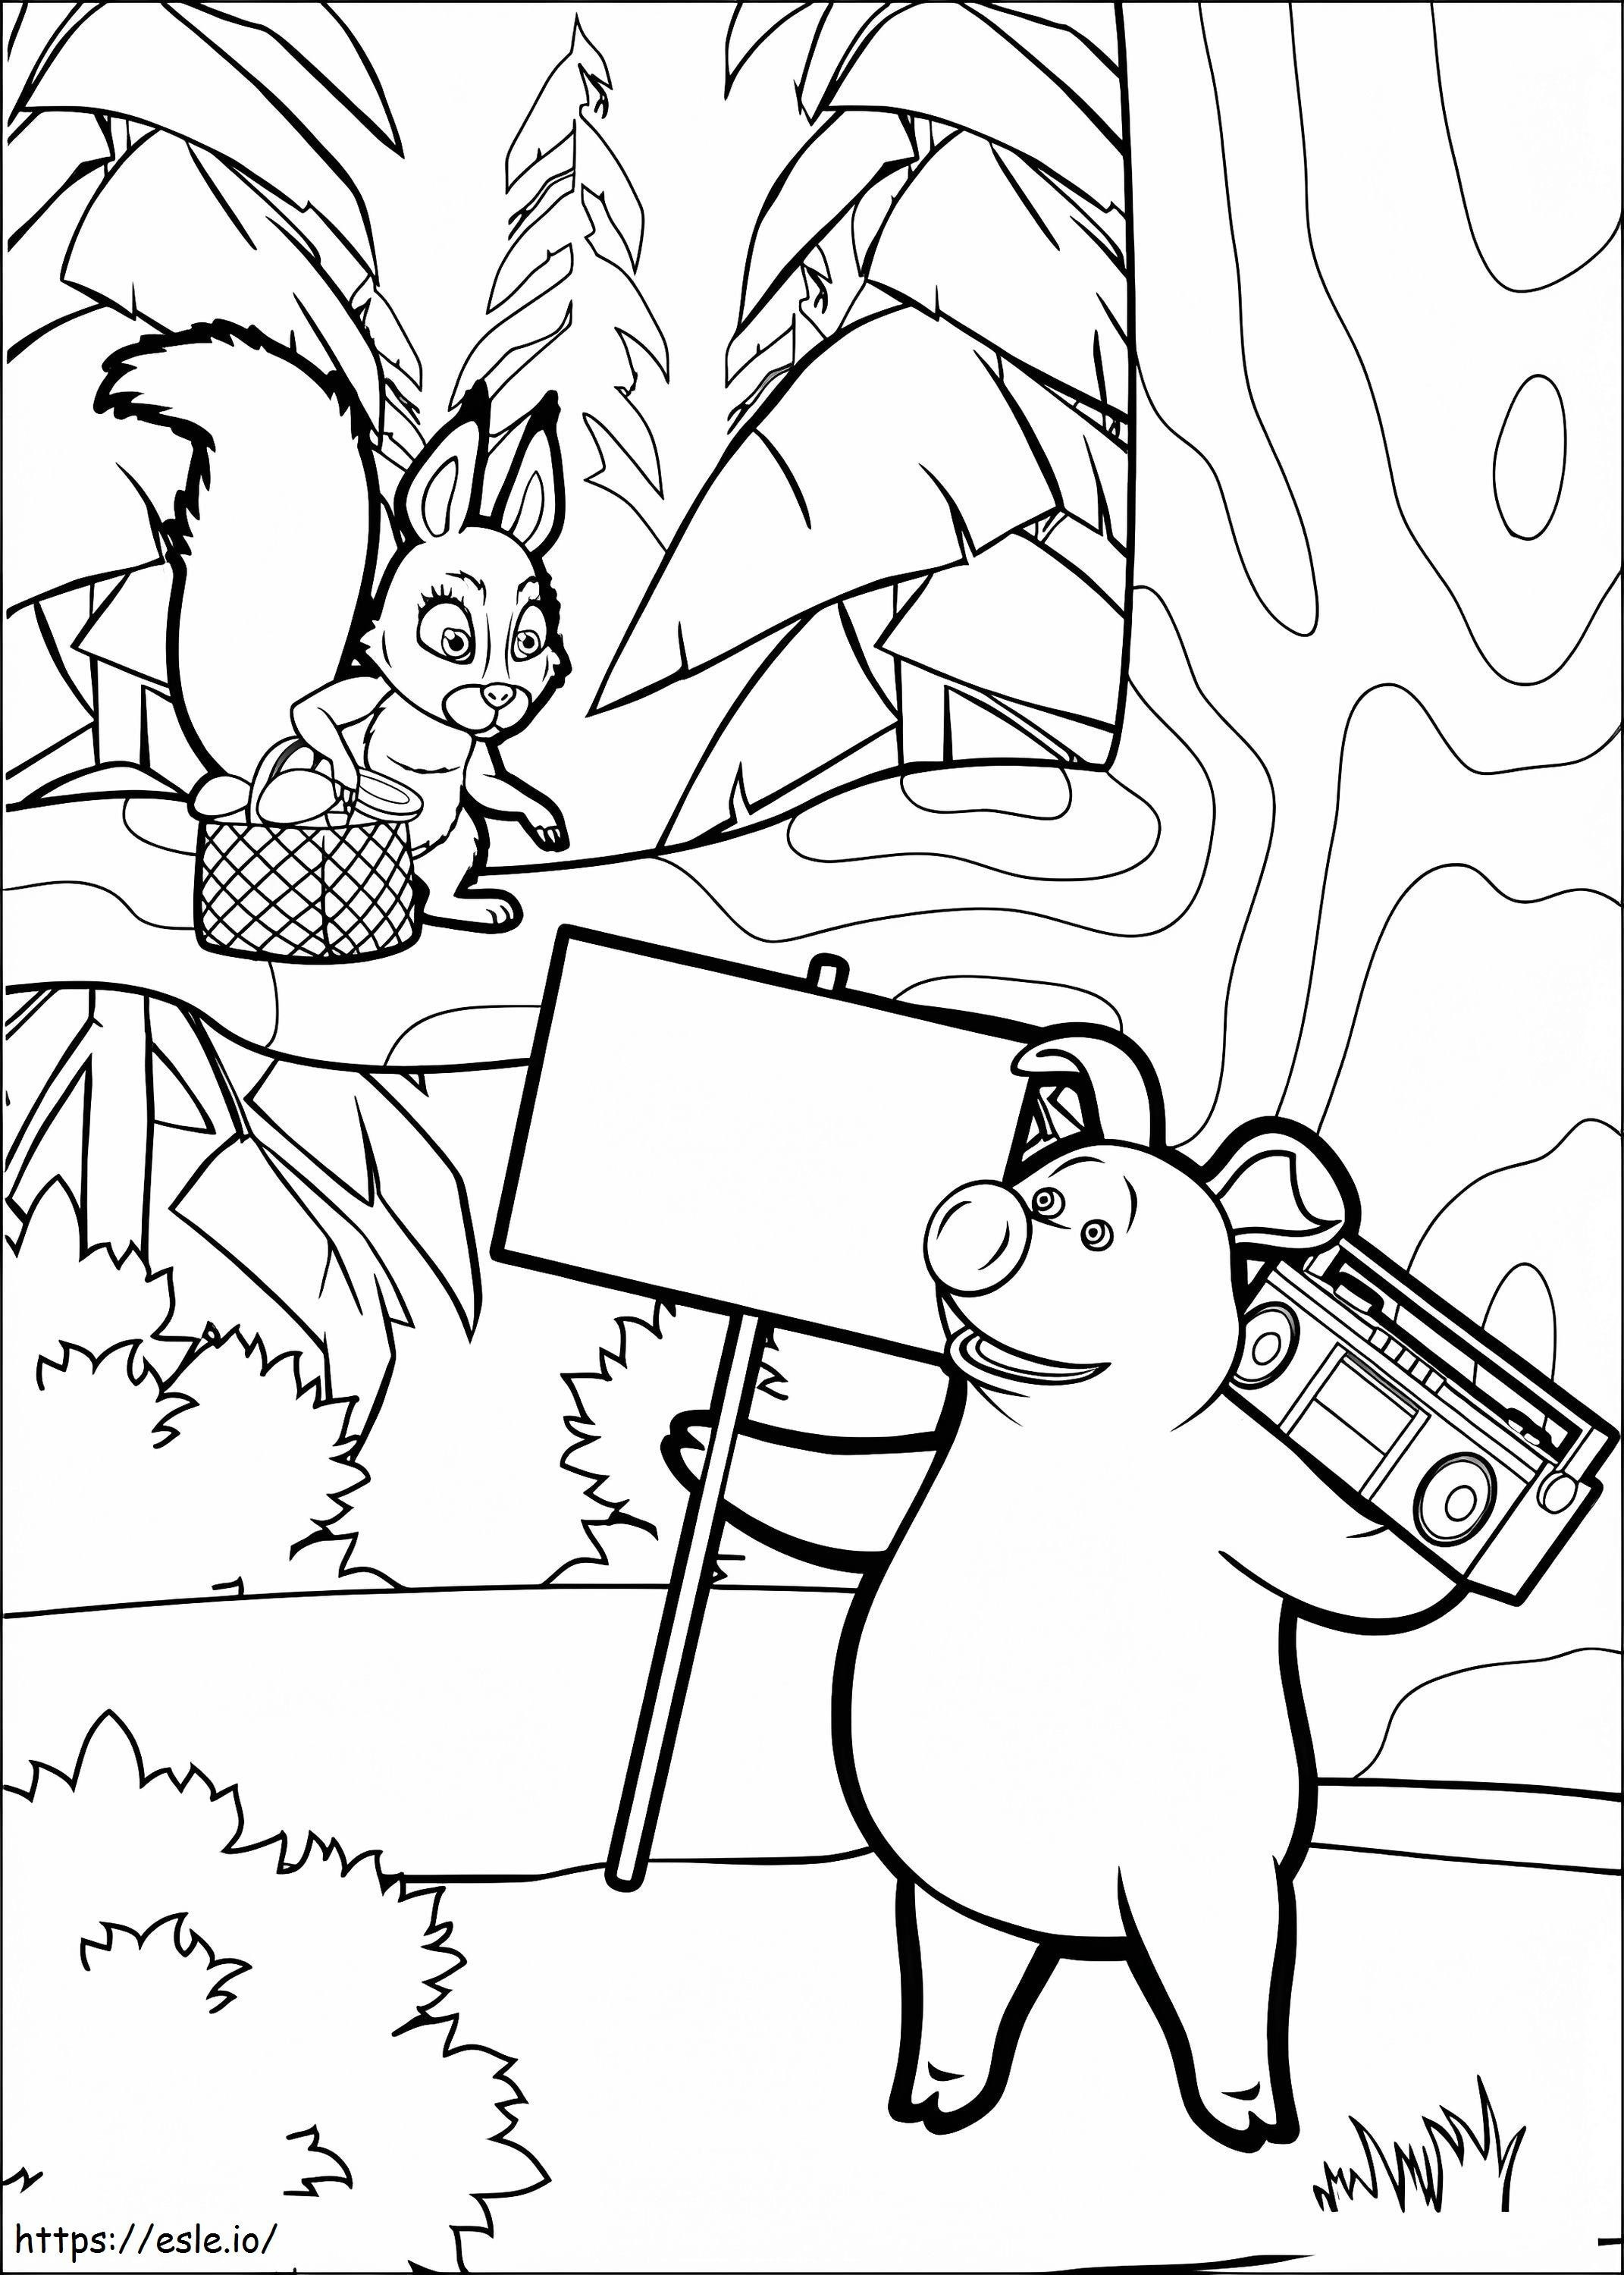 Squirrels And Pig From Masha And The Bear coloring page